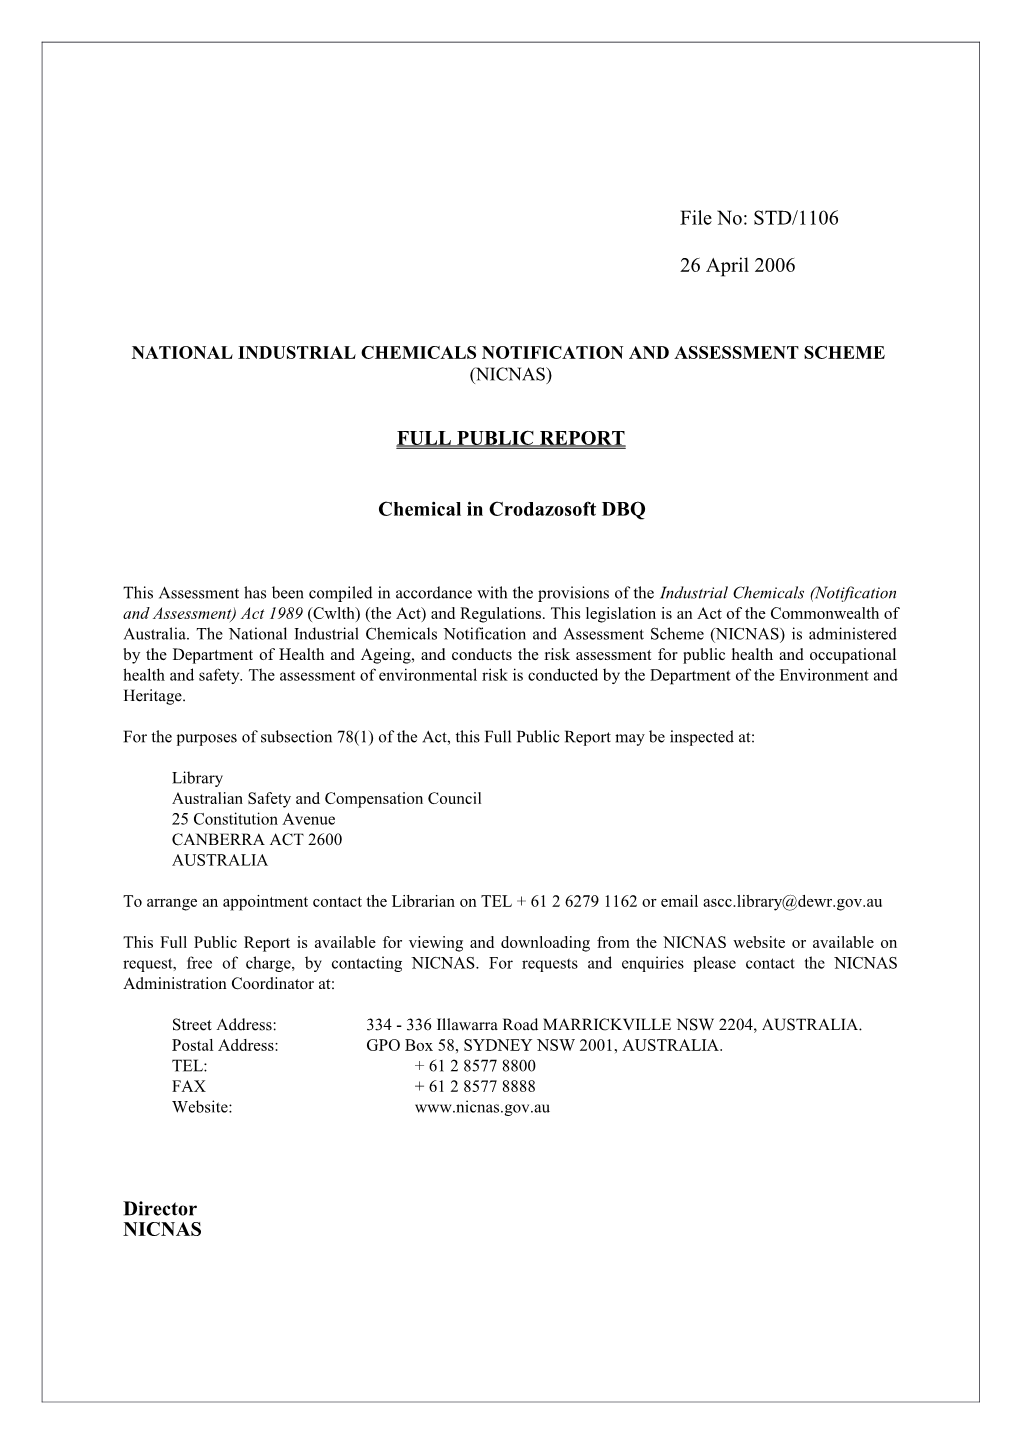 National Industrial Chemicals Notification and Assessment Scheme s2